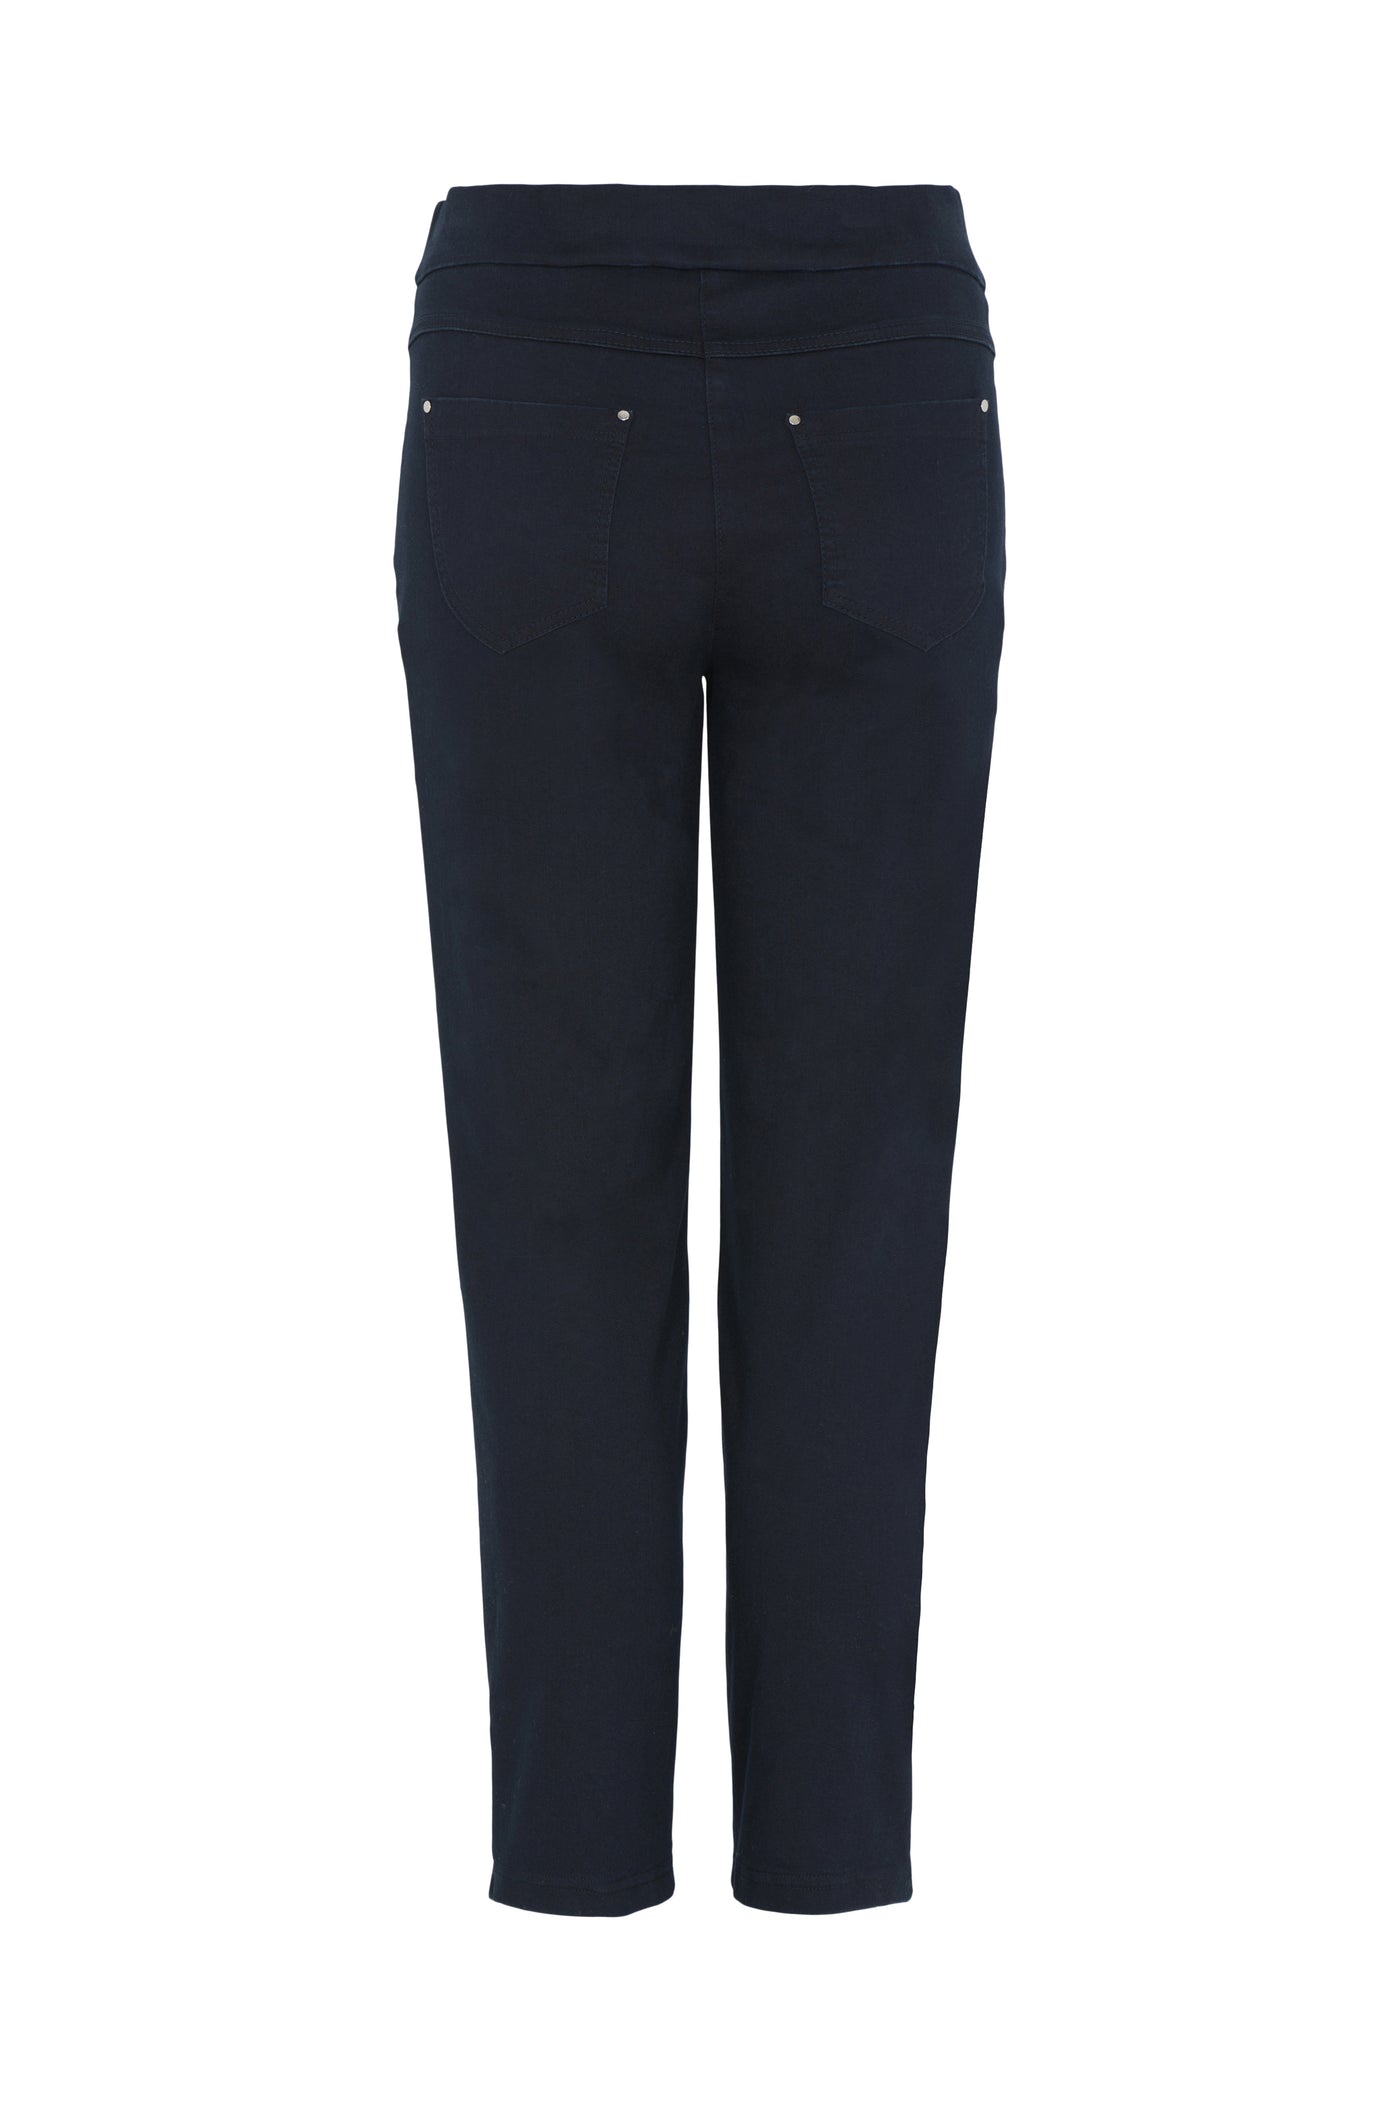 Ink Navy Denim 'Nena' Trousers with Ankle Zips